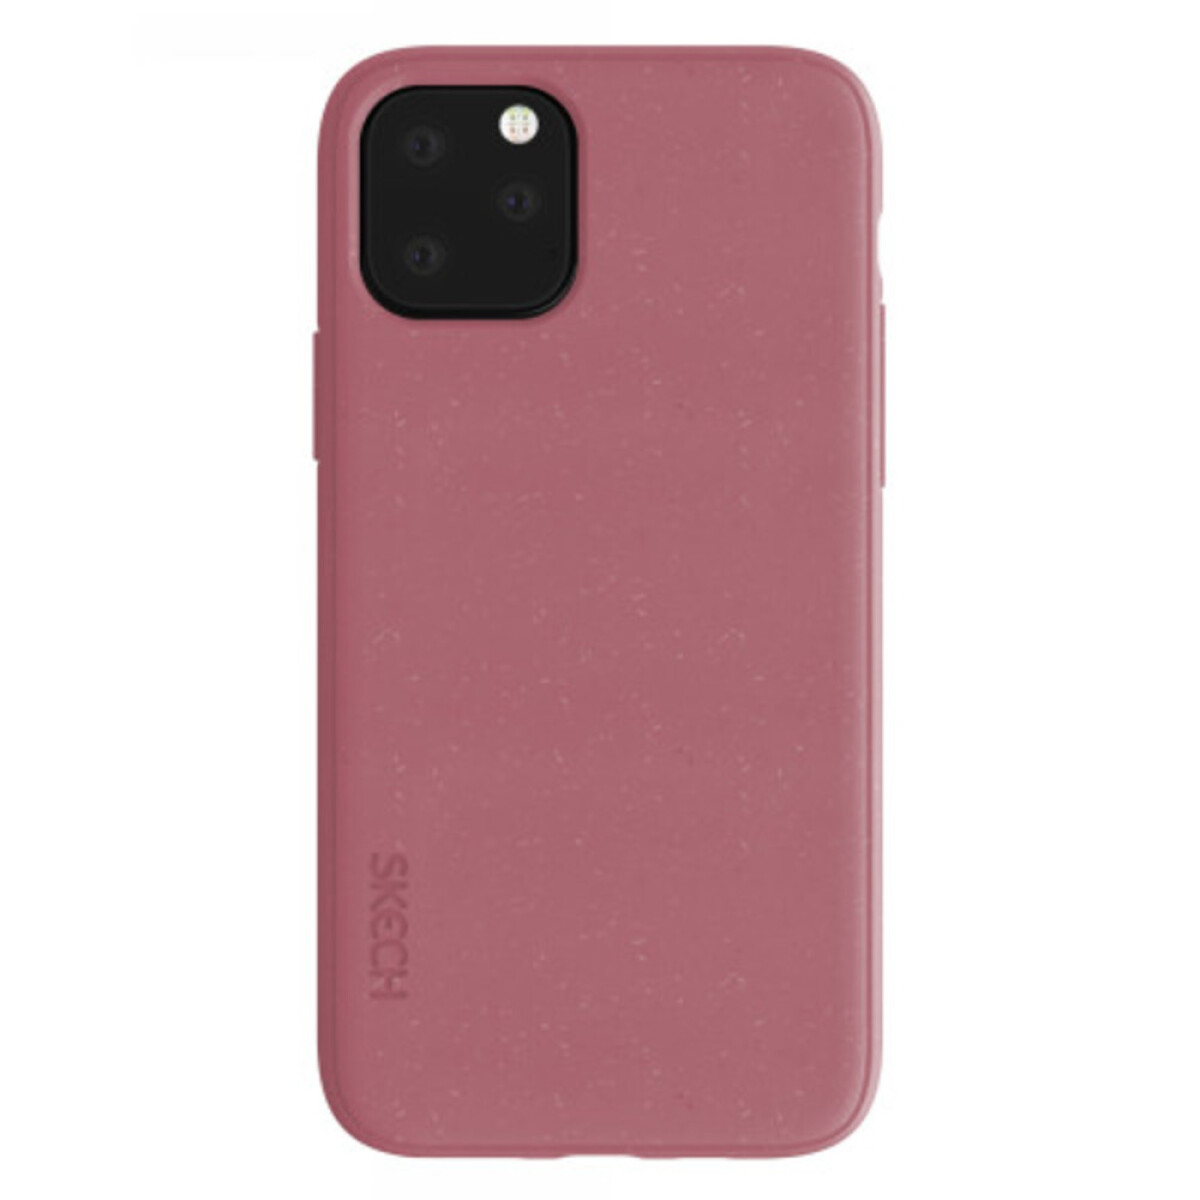 Pro Pro Max Apple, 11 Bookcover, violett, BioCase Max, iPhone SKECH iPhone Pink 11